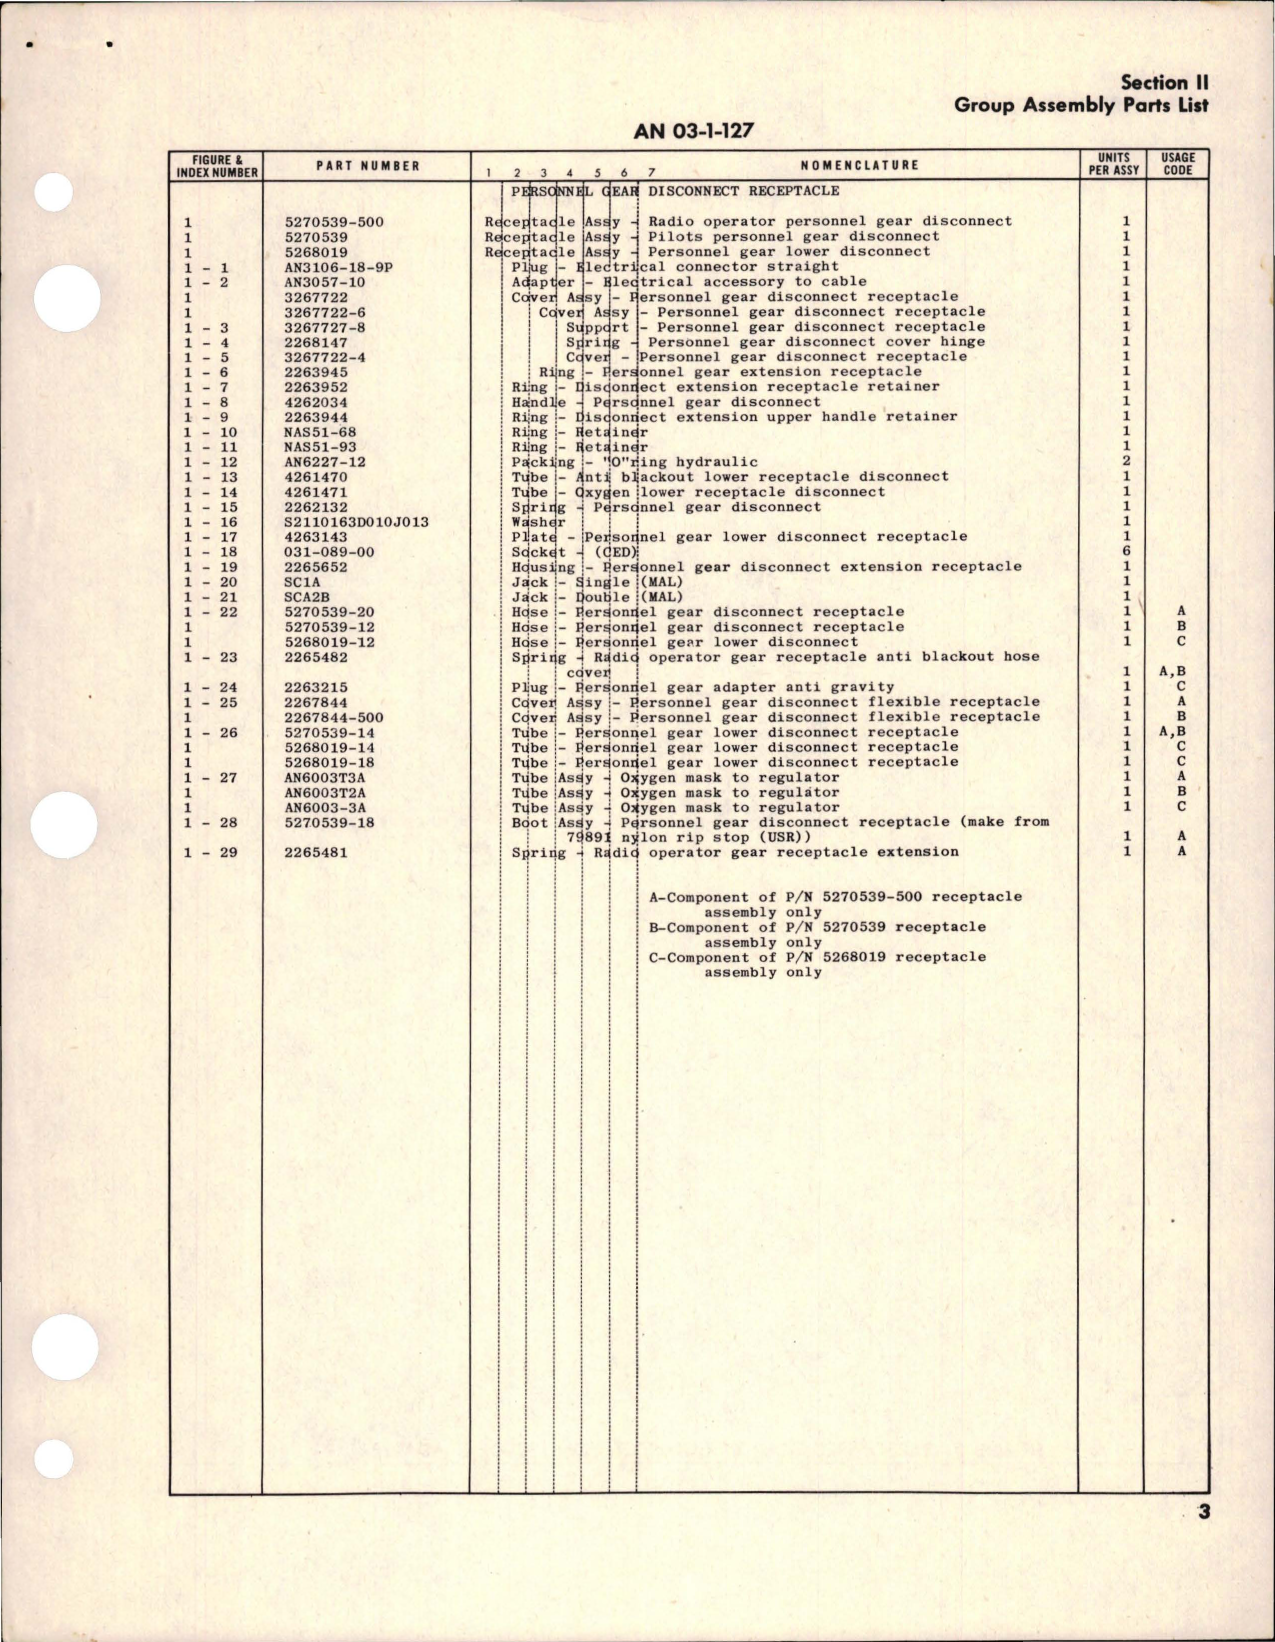 Sample page 5 from AirCorps Library document: Parts Catalog for Personnel Gear 